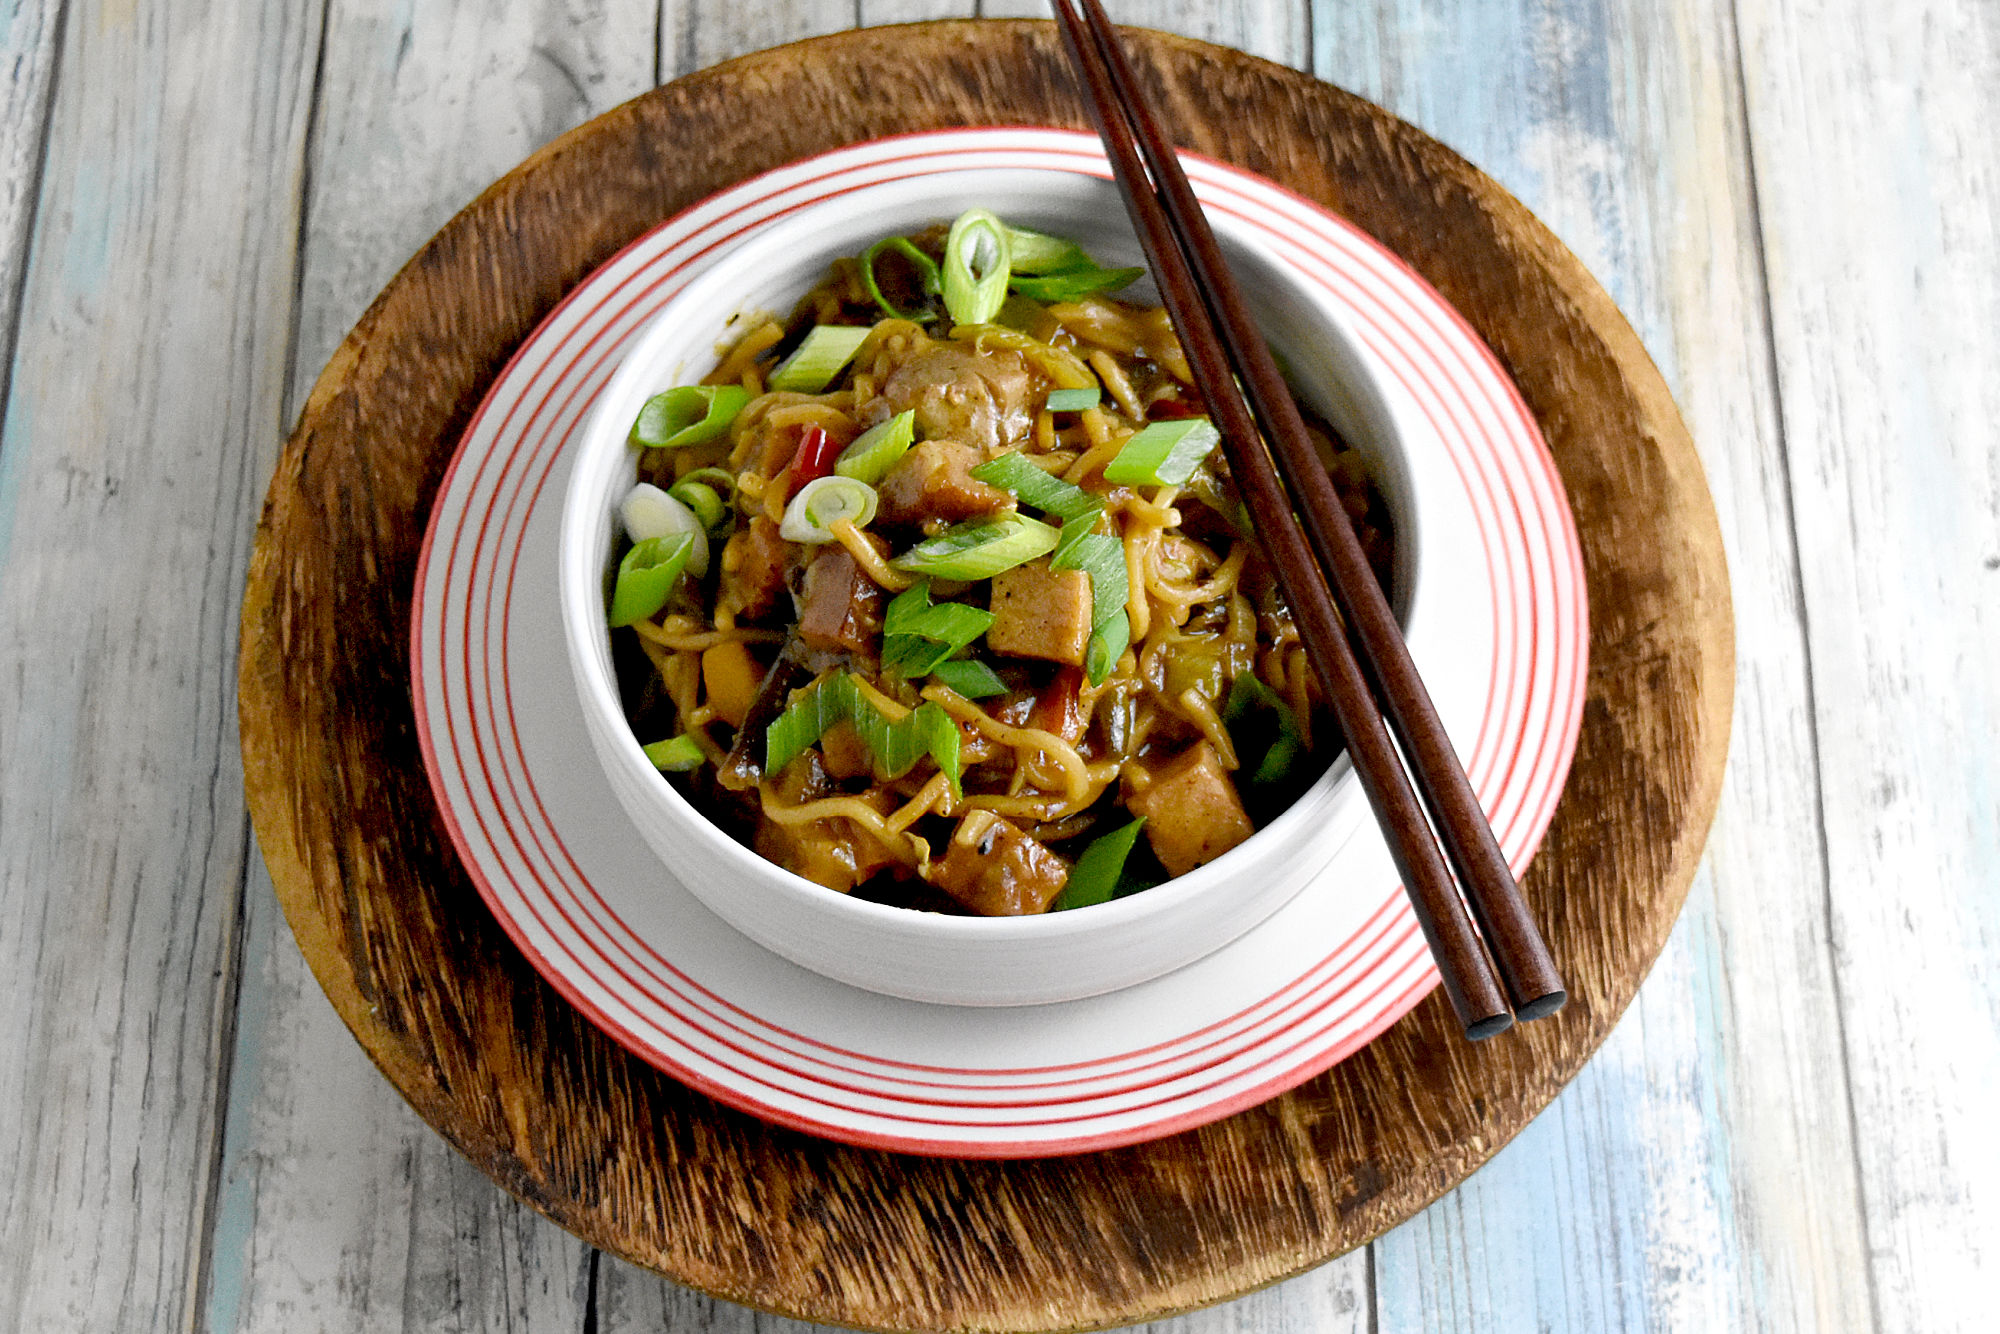 Pork and Noodle Stir Fry is a quick an easy dinner on the table super quick. The Fortune noodles cook up quick and taste hearty and delicious in this simple stir fry. #cooklikeawokstar #norulestostirfry #fortunerecipechallenge